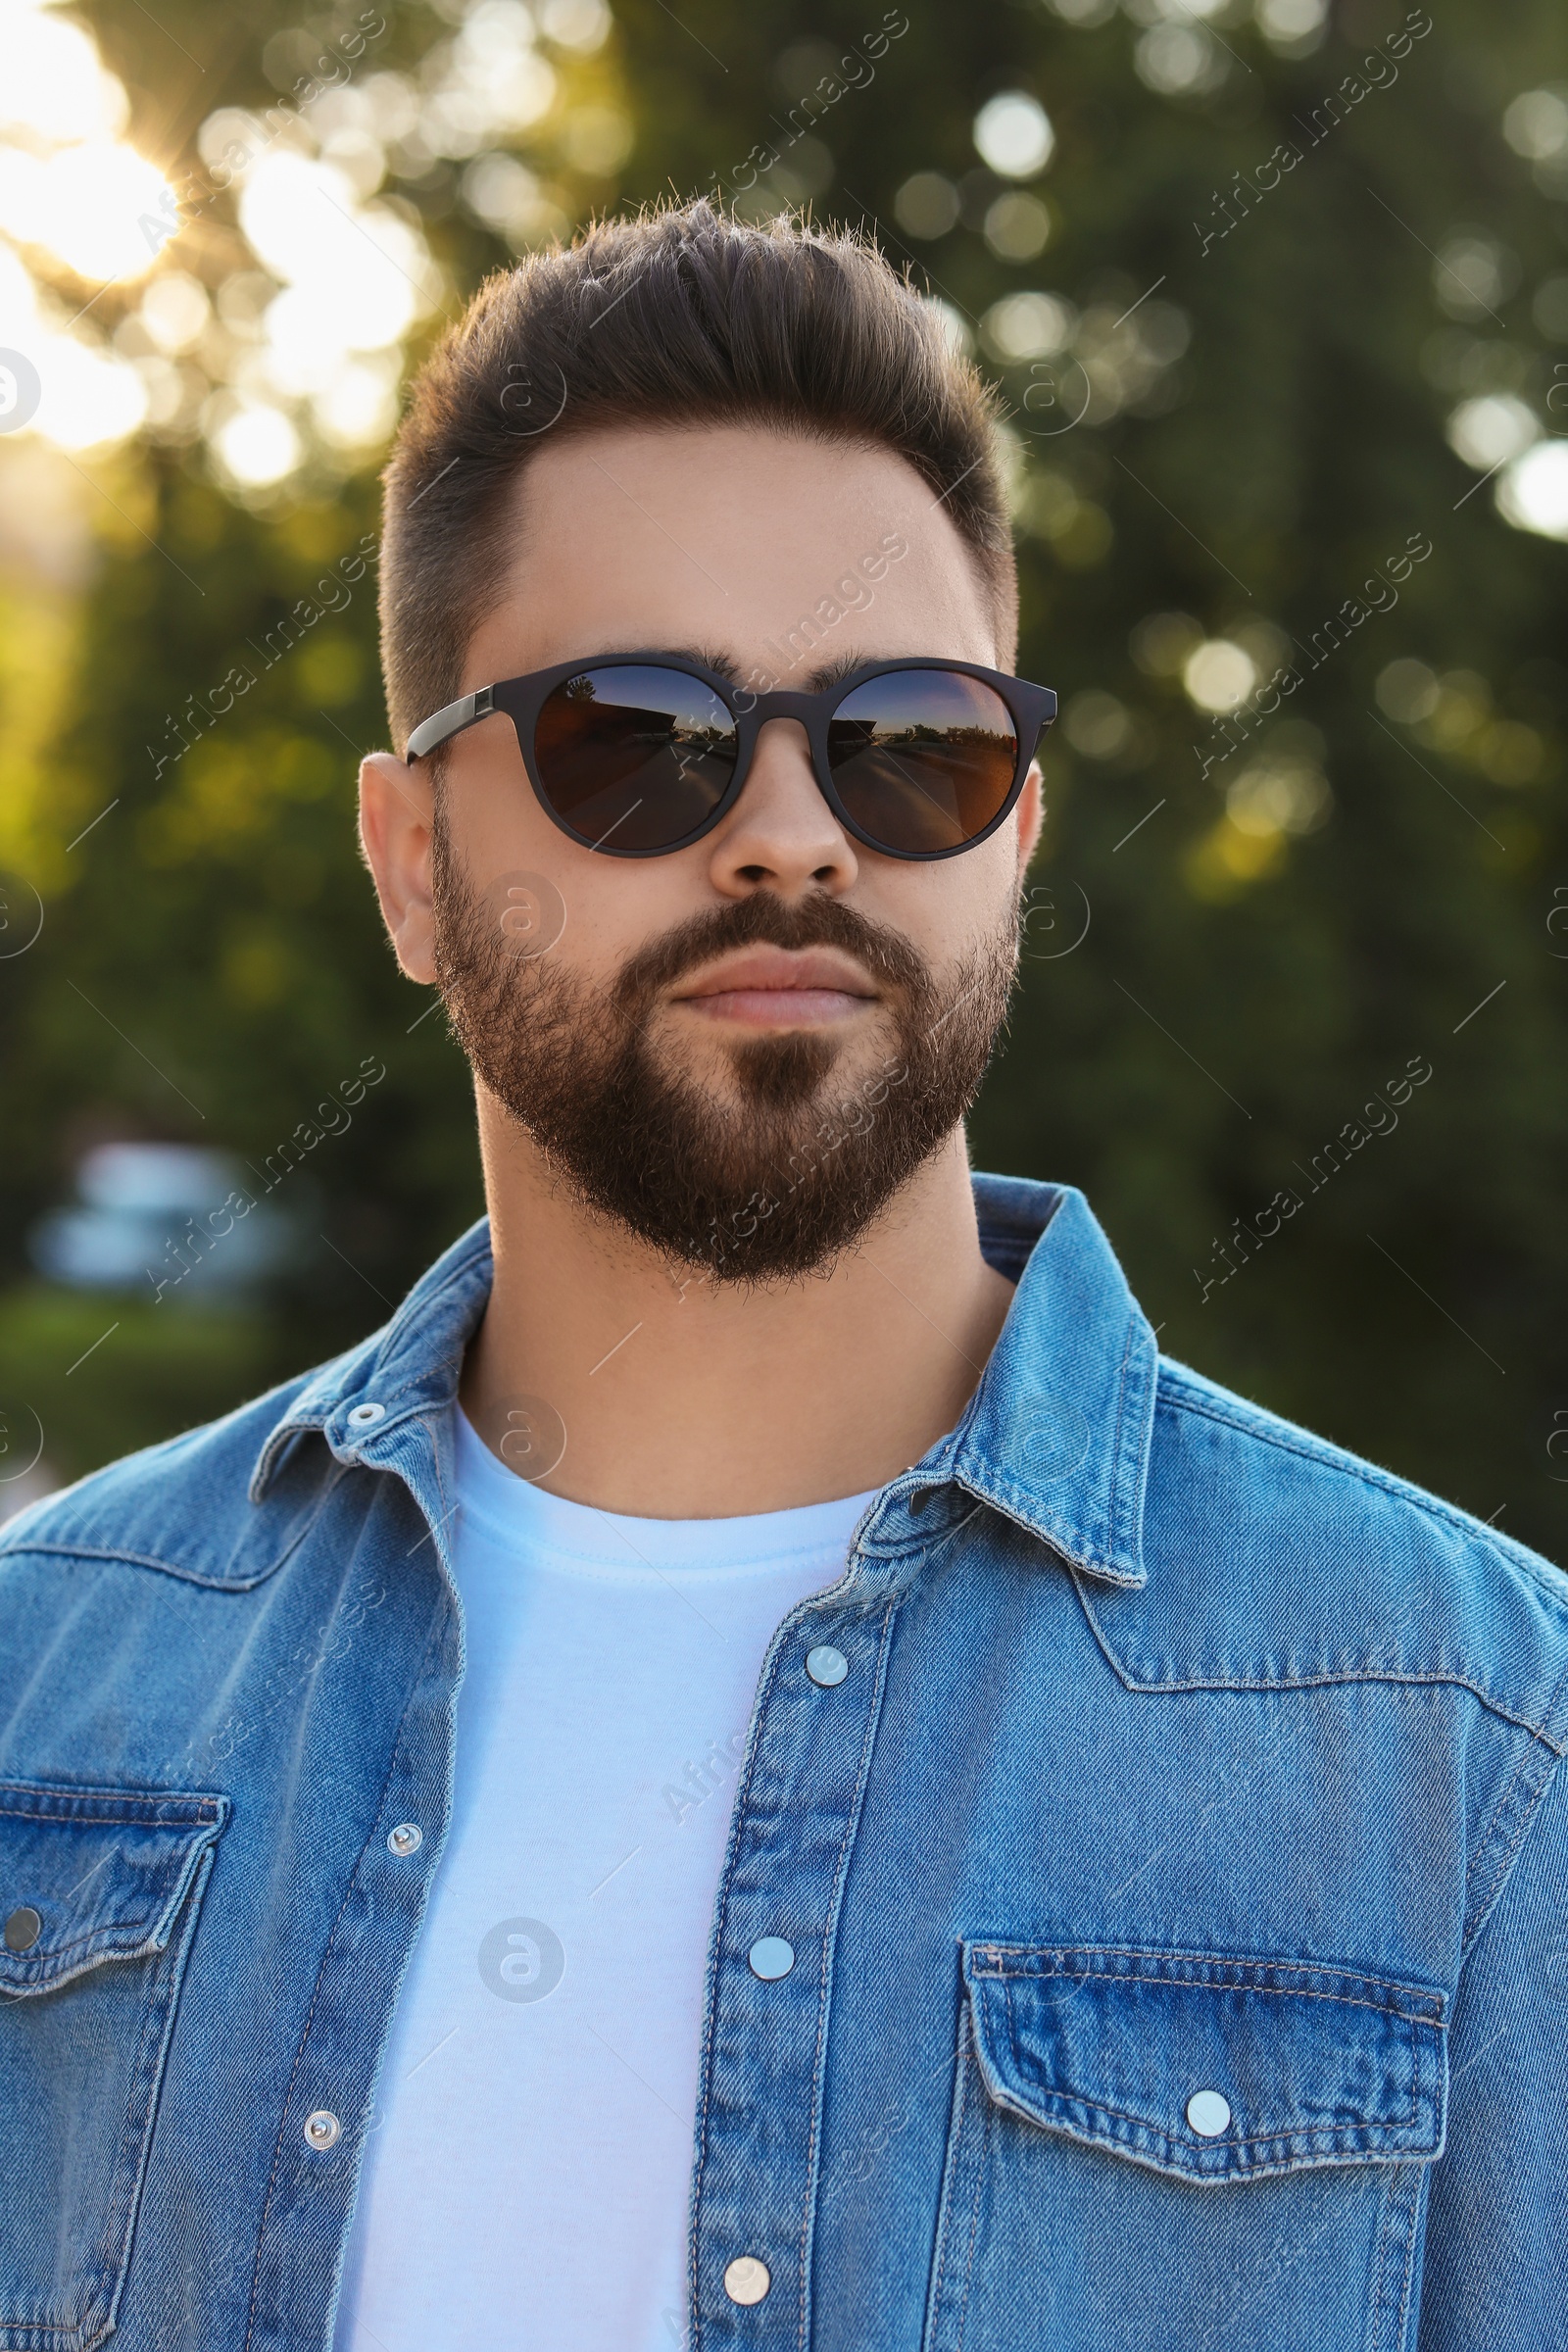 Photo of Handsome man in sunglasses outdoors on summer day